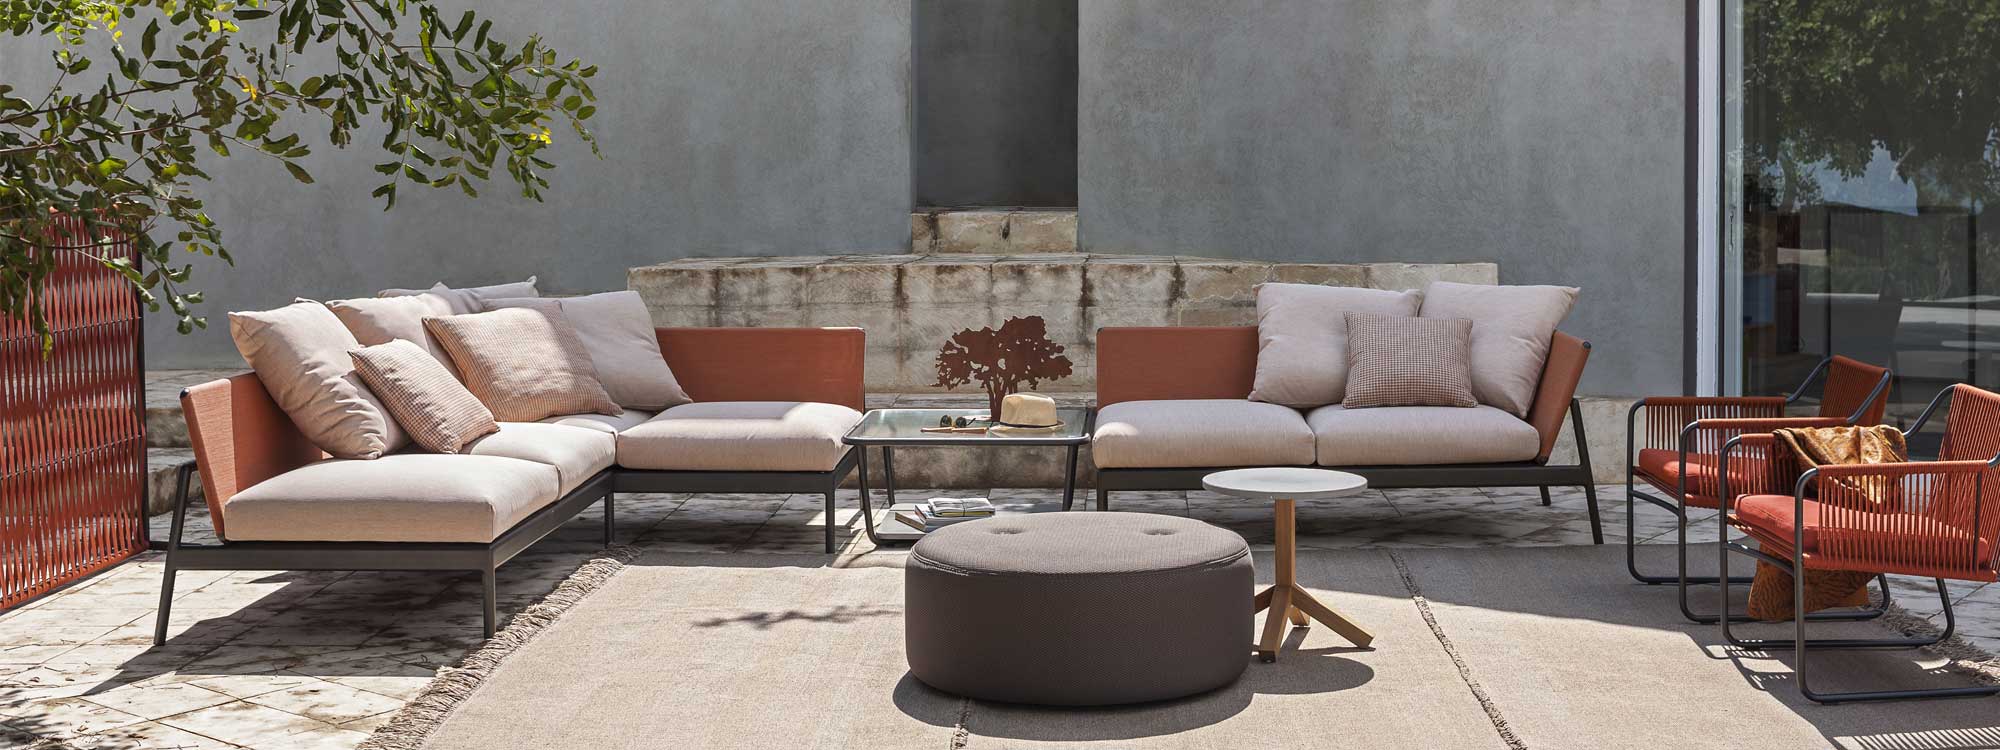 Image of Piper garden corner sofa with smoke-colored frame, orange back and cream cushions by RODA